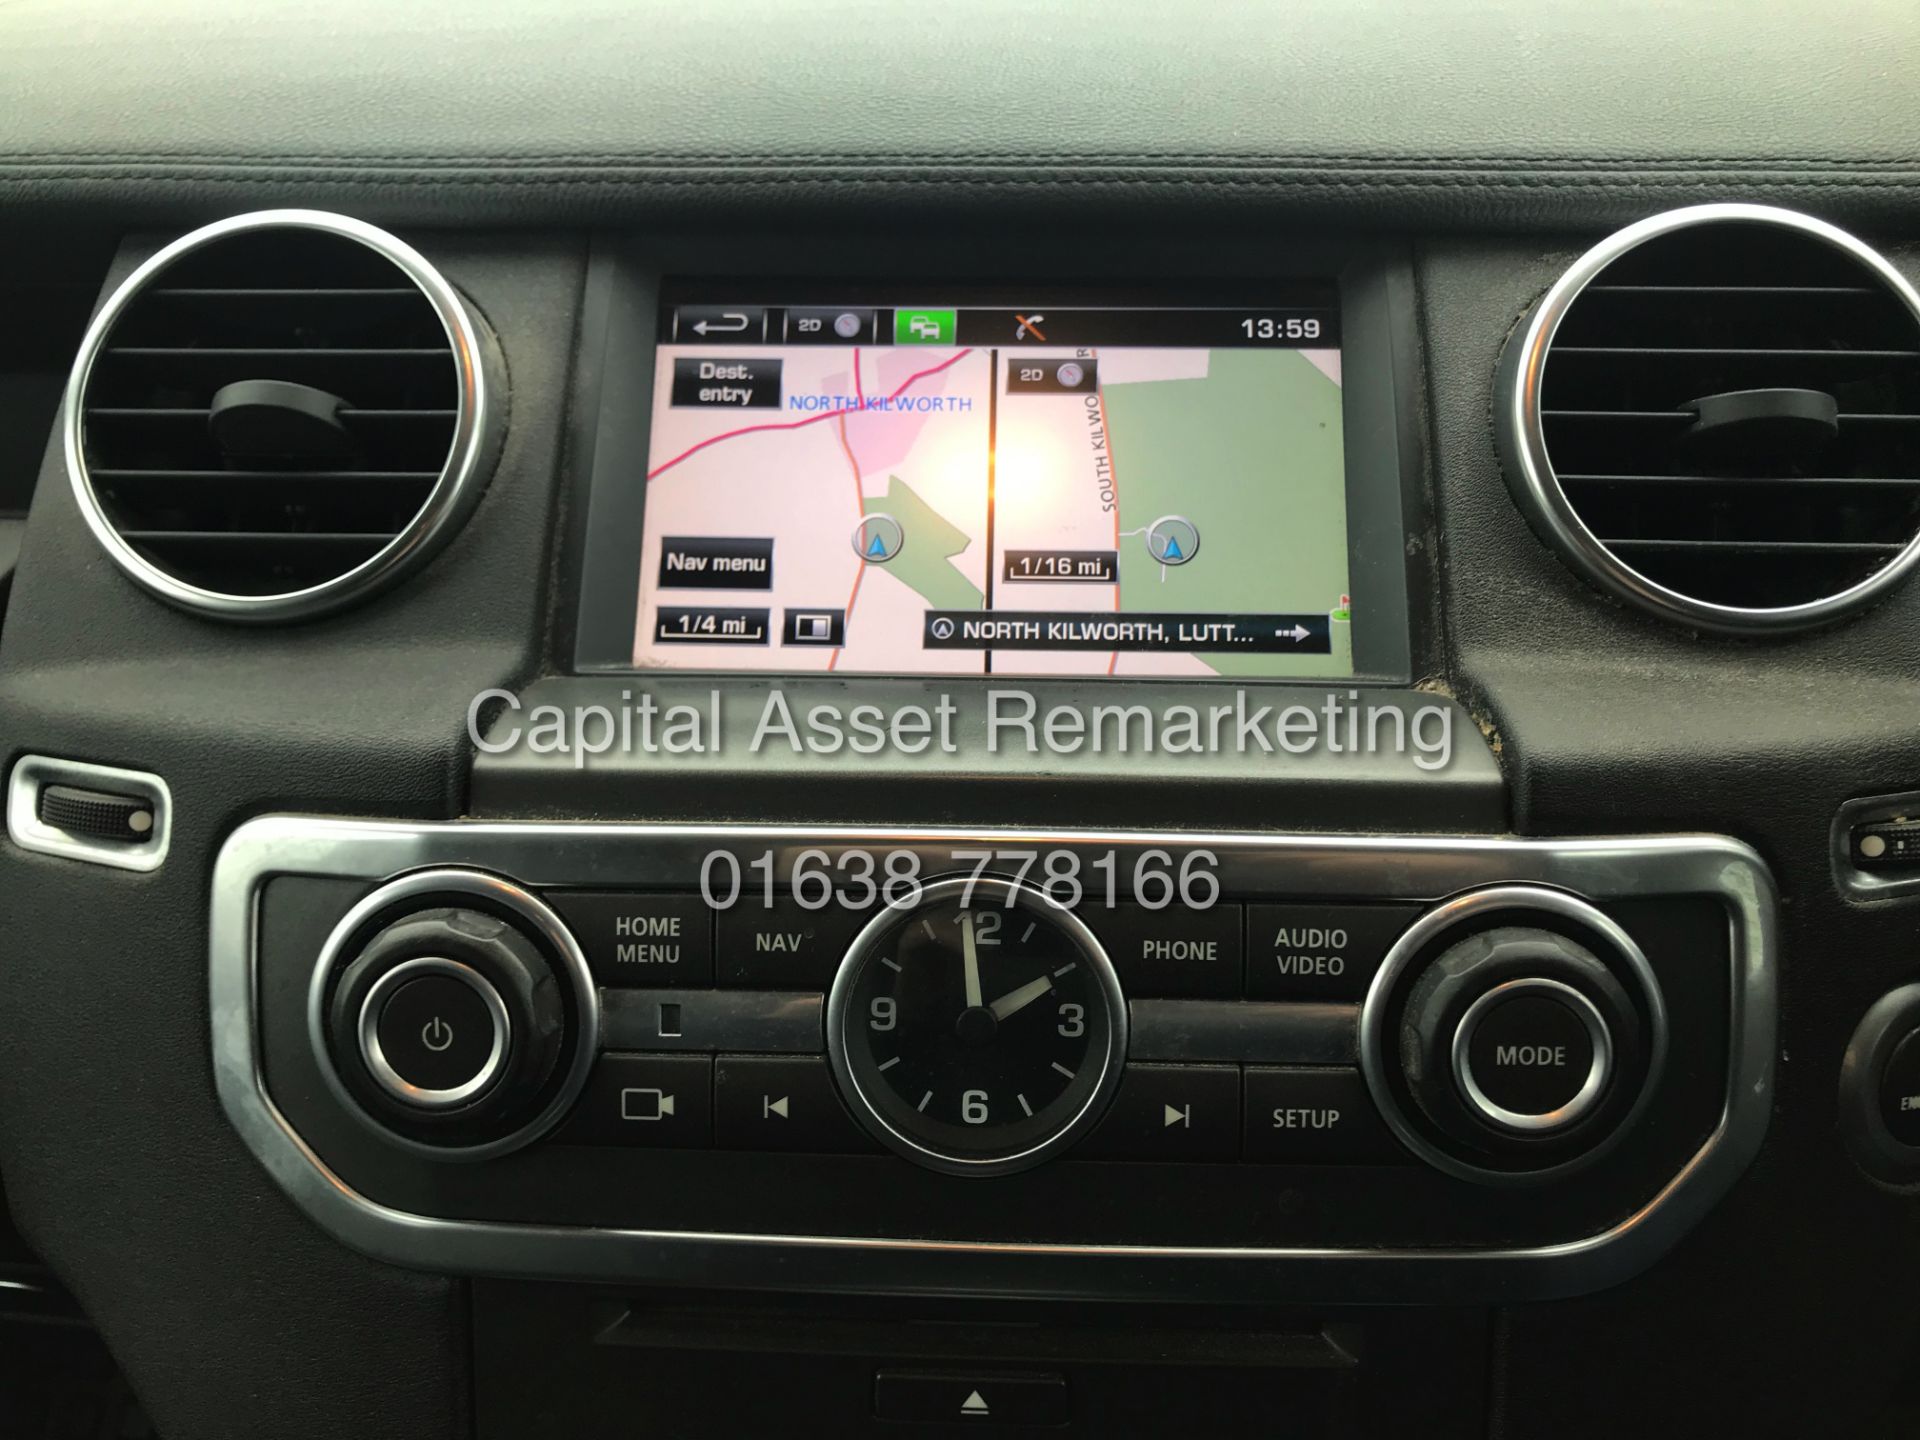 LANDROVER DISCOVERY 4 "SE" AUTO 3.0SDV6 - (2016 REG) 1 KEEPER - SAT NAV - LEATHER - HUGE SPEC -WOW! - Image 14 of 20